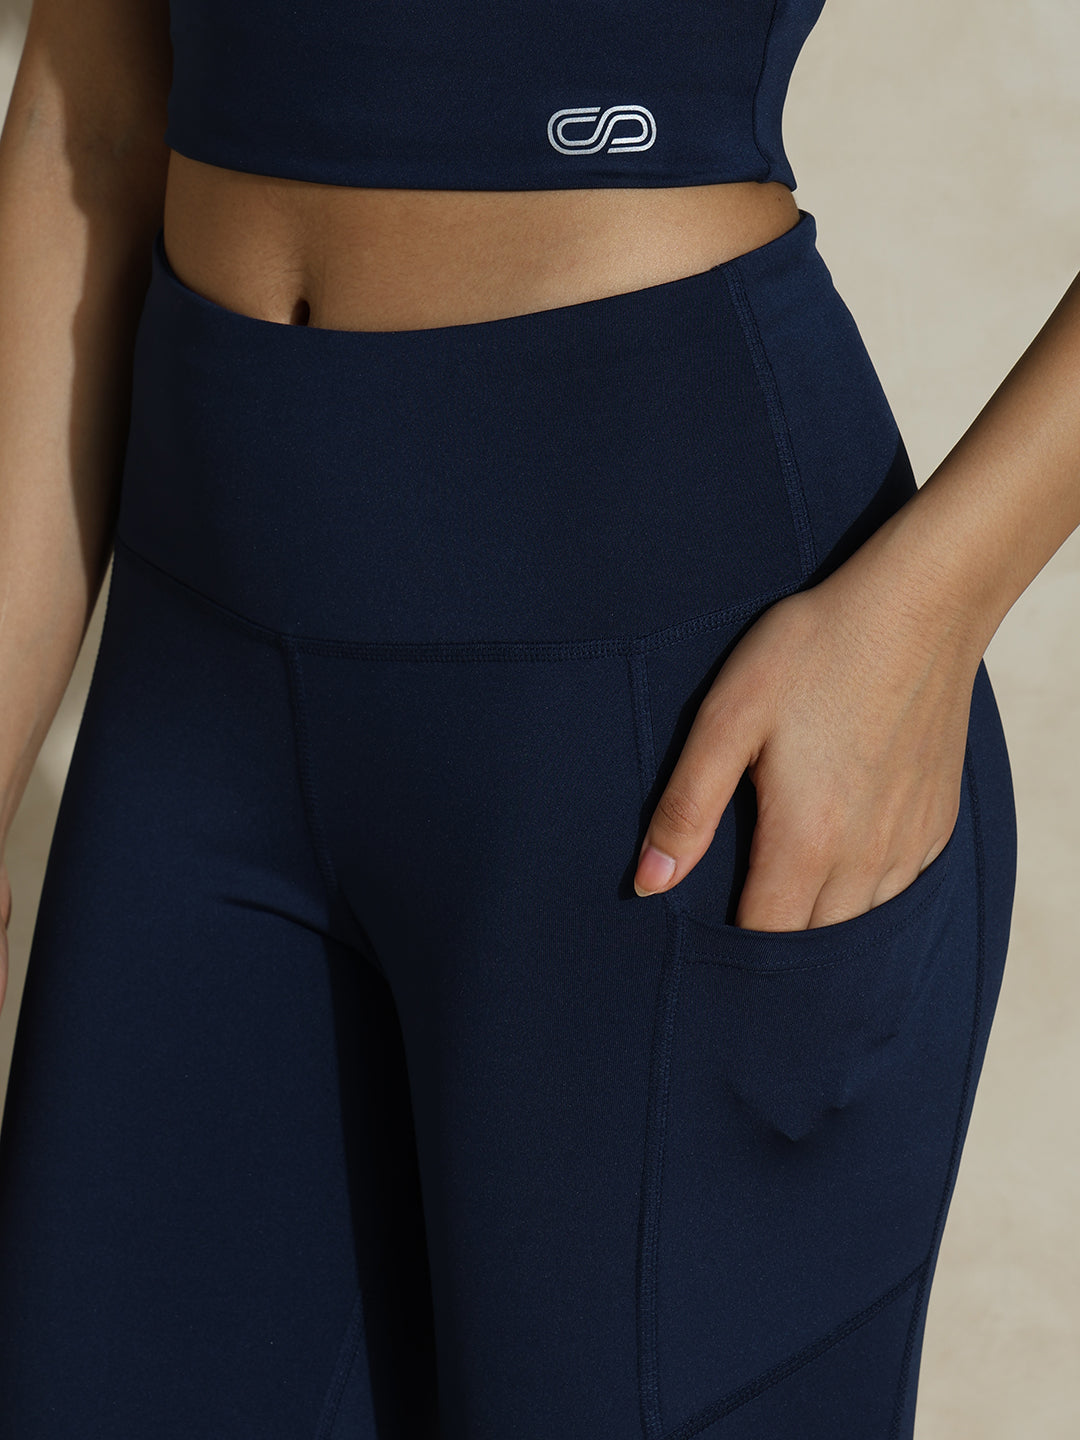 Navy Keyhole Back Crop Top with Clasp & Aura Leggings